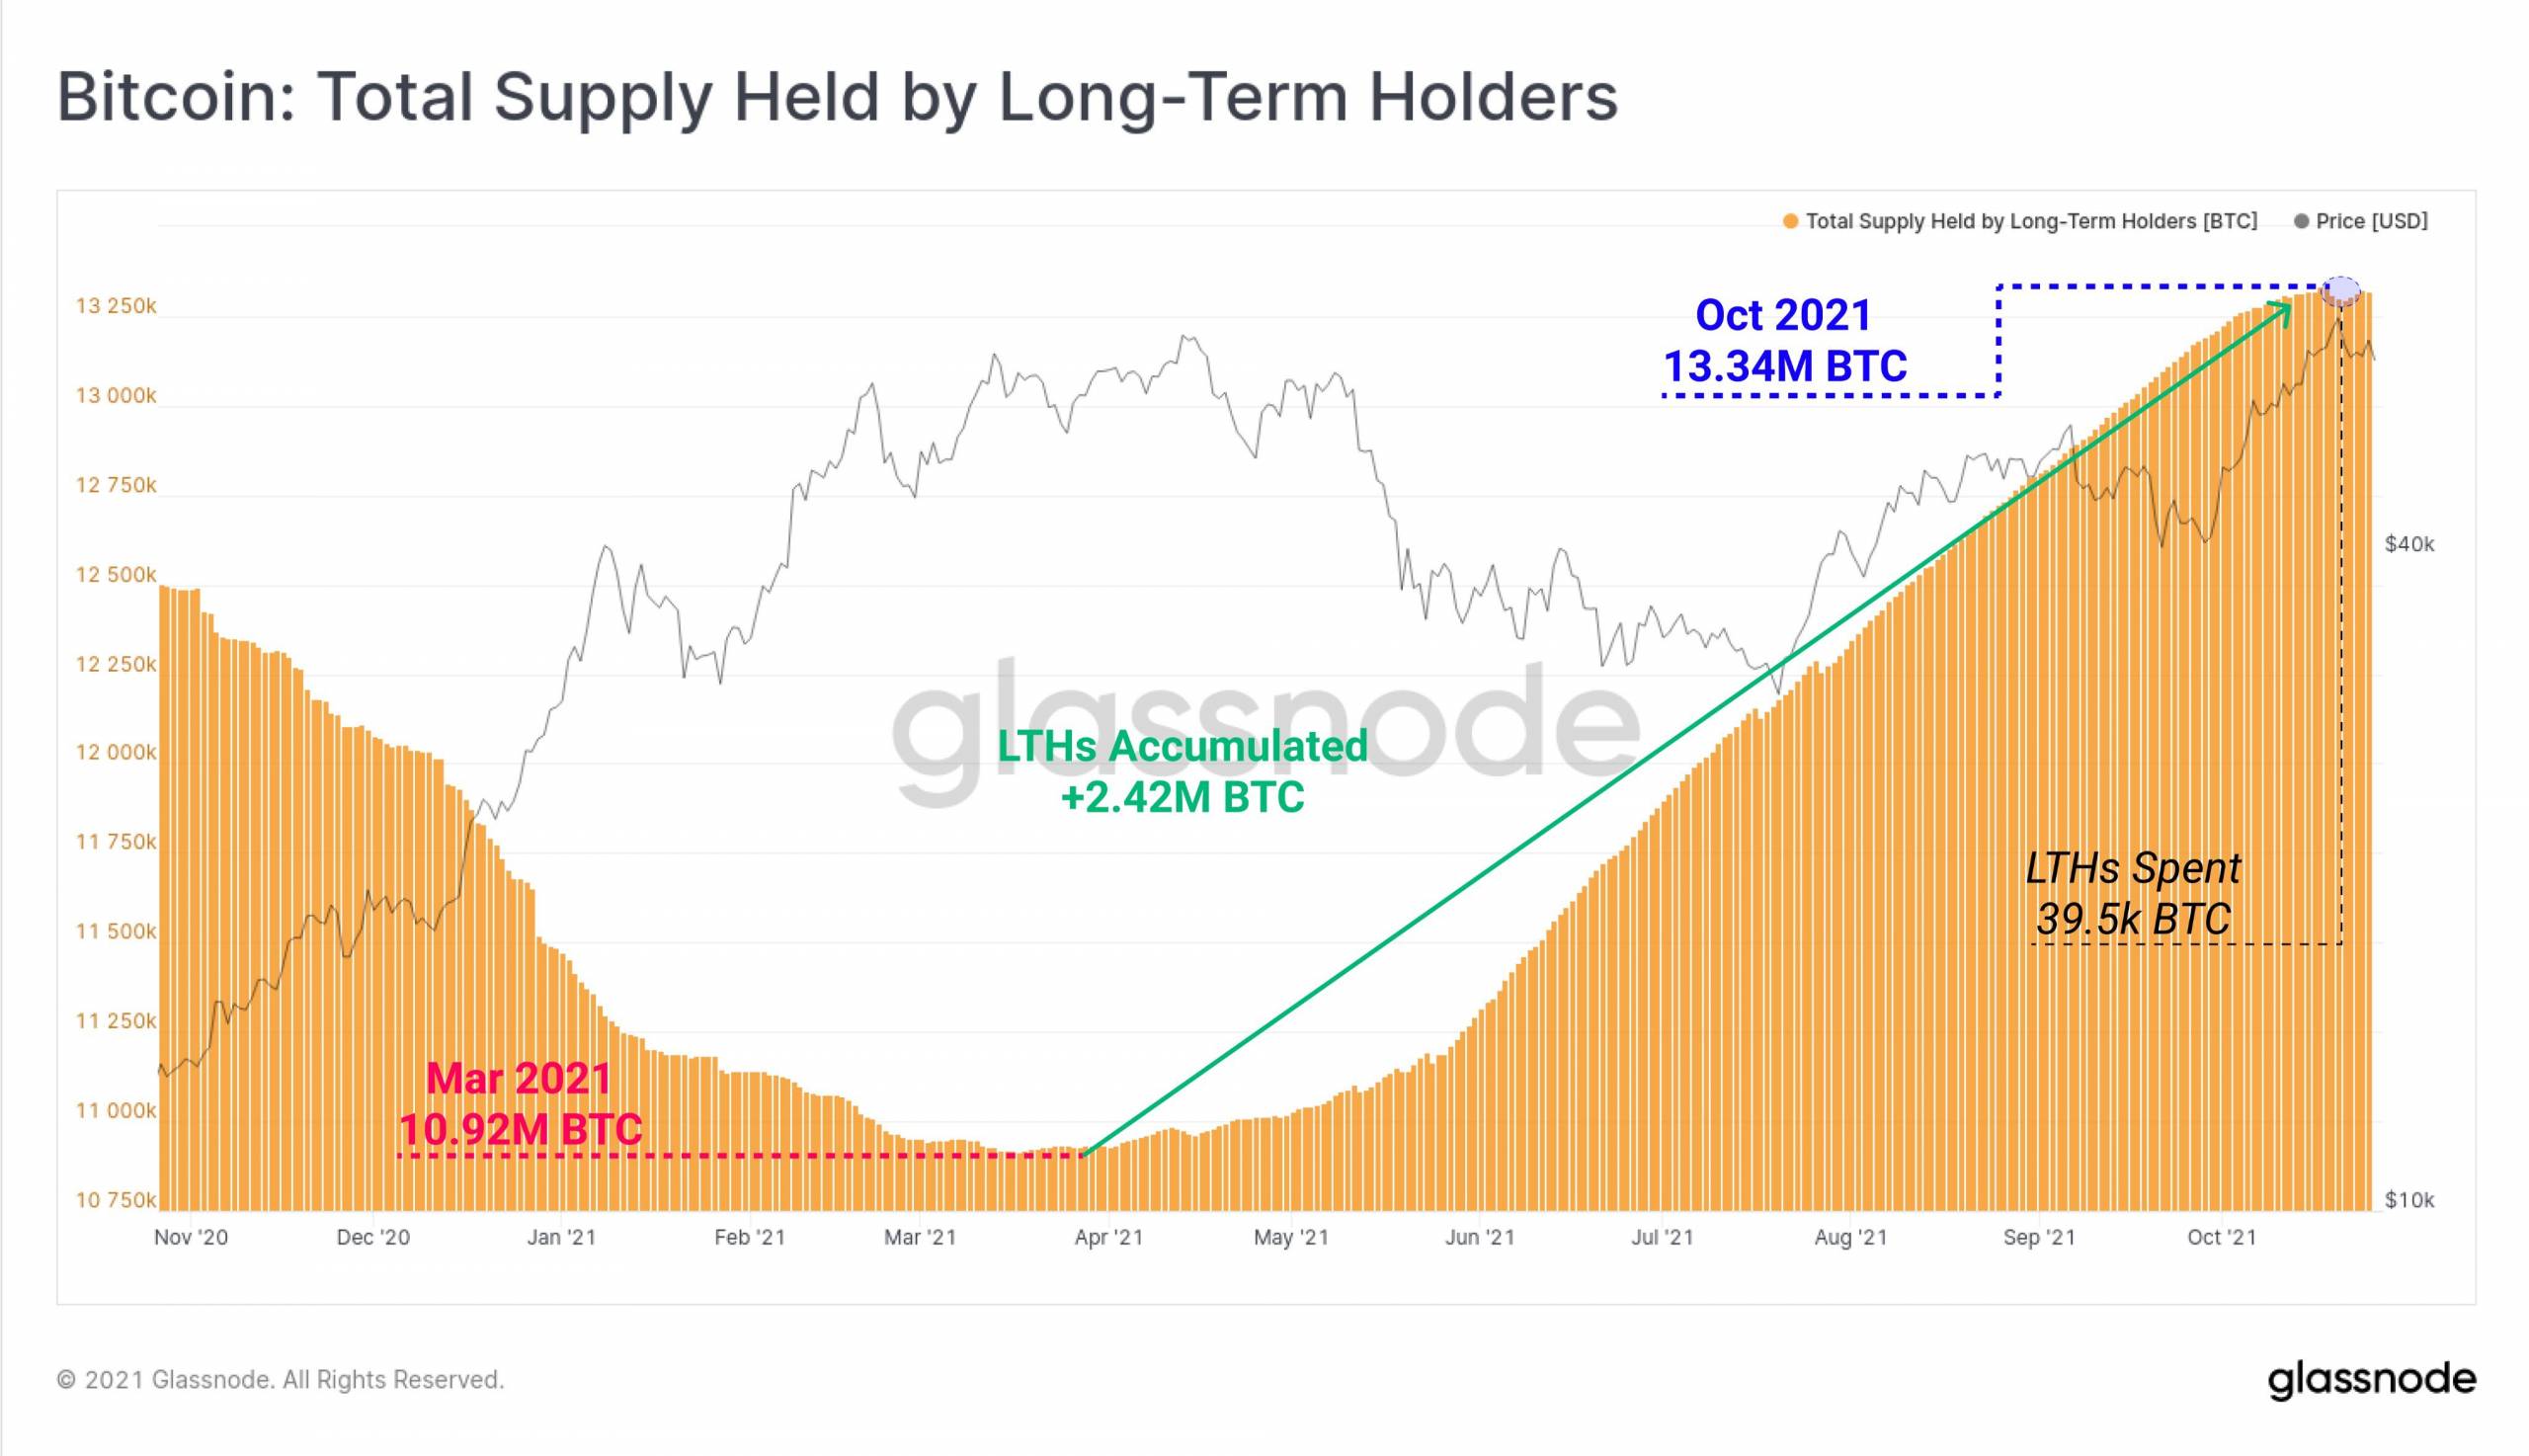 Bitcoin: total supply held by long-term holders, Source: Glassnode 